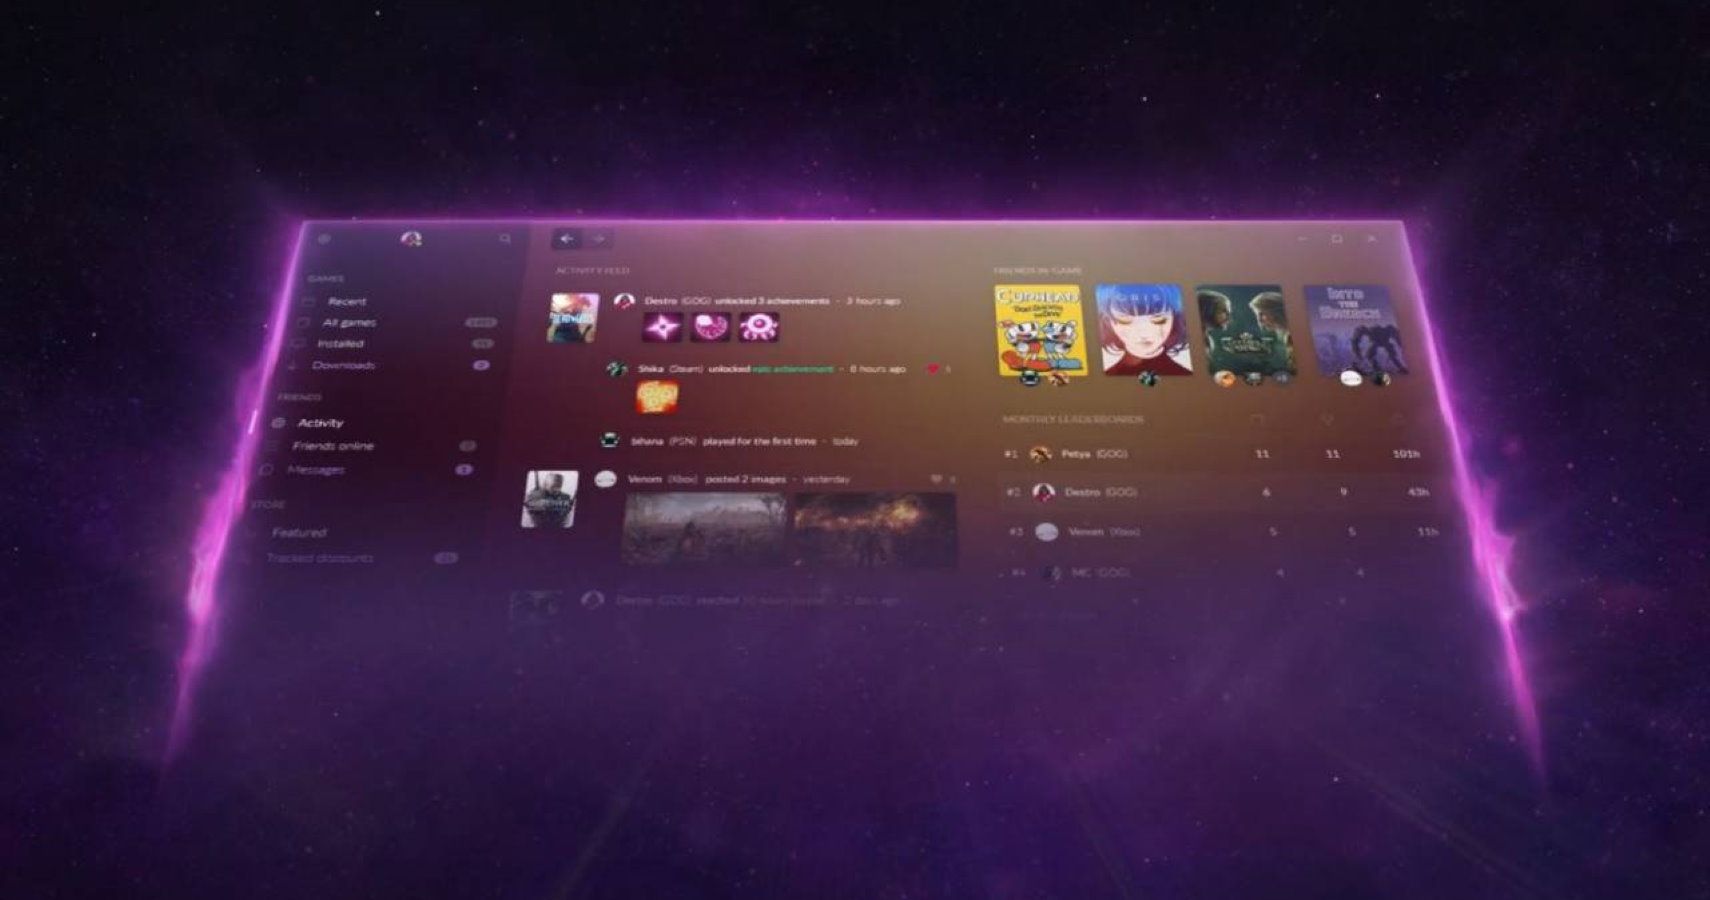 gog galaxy connection to communication service was lost